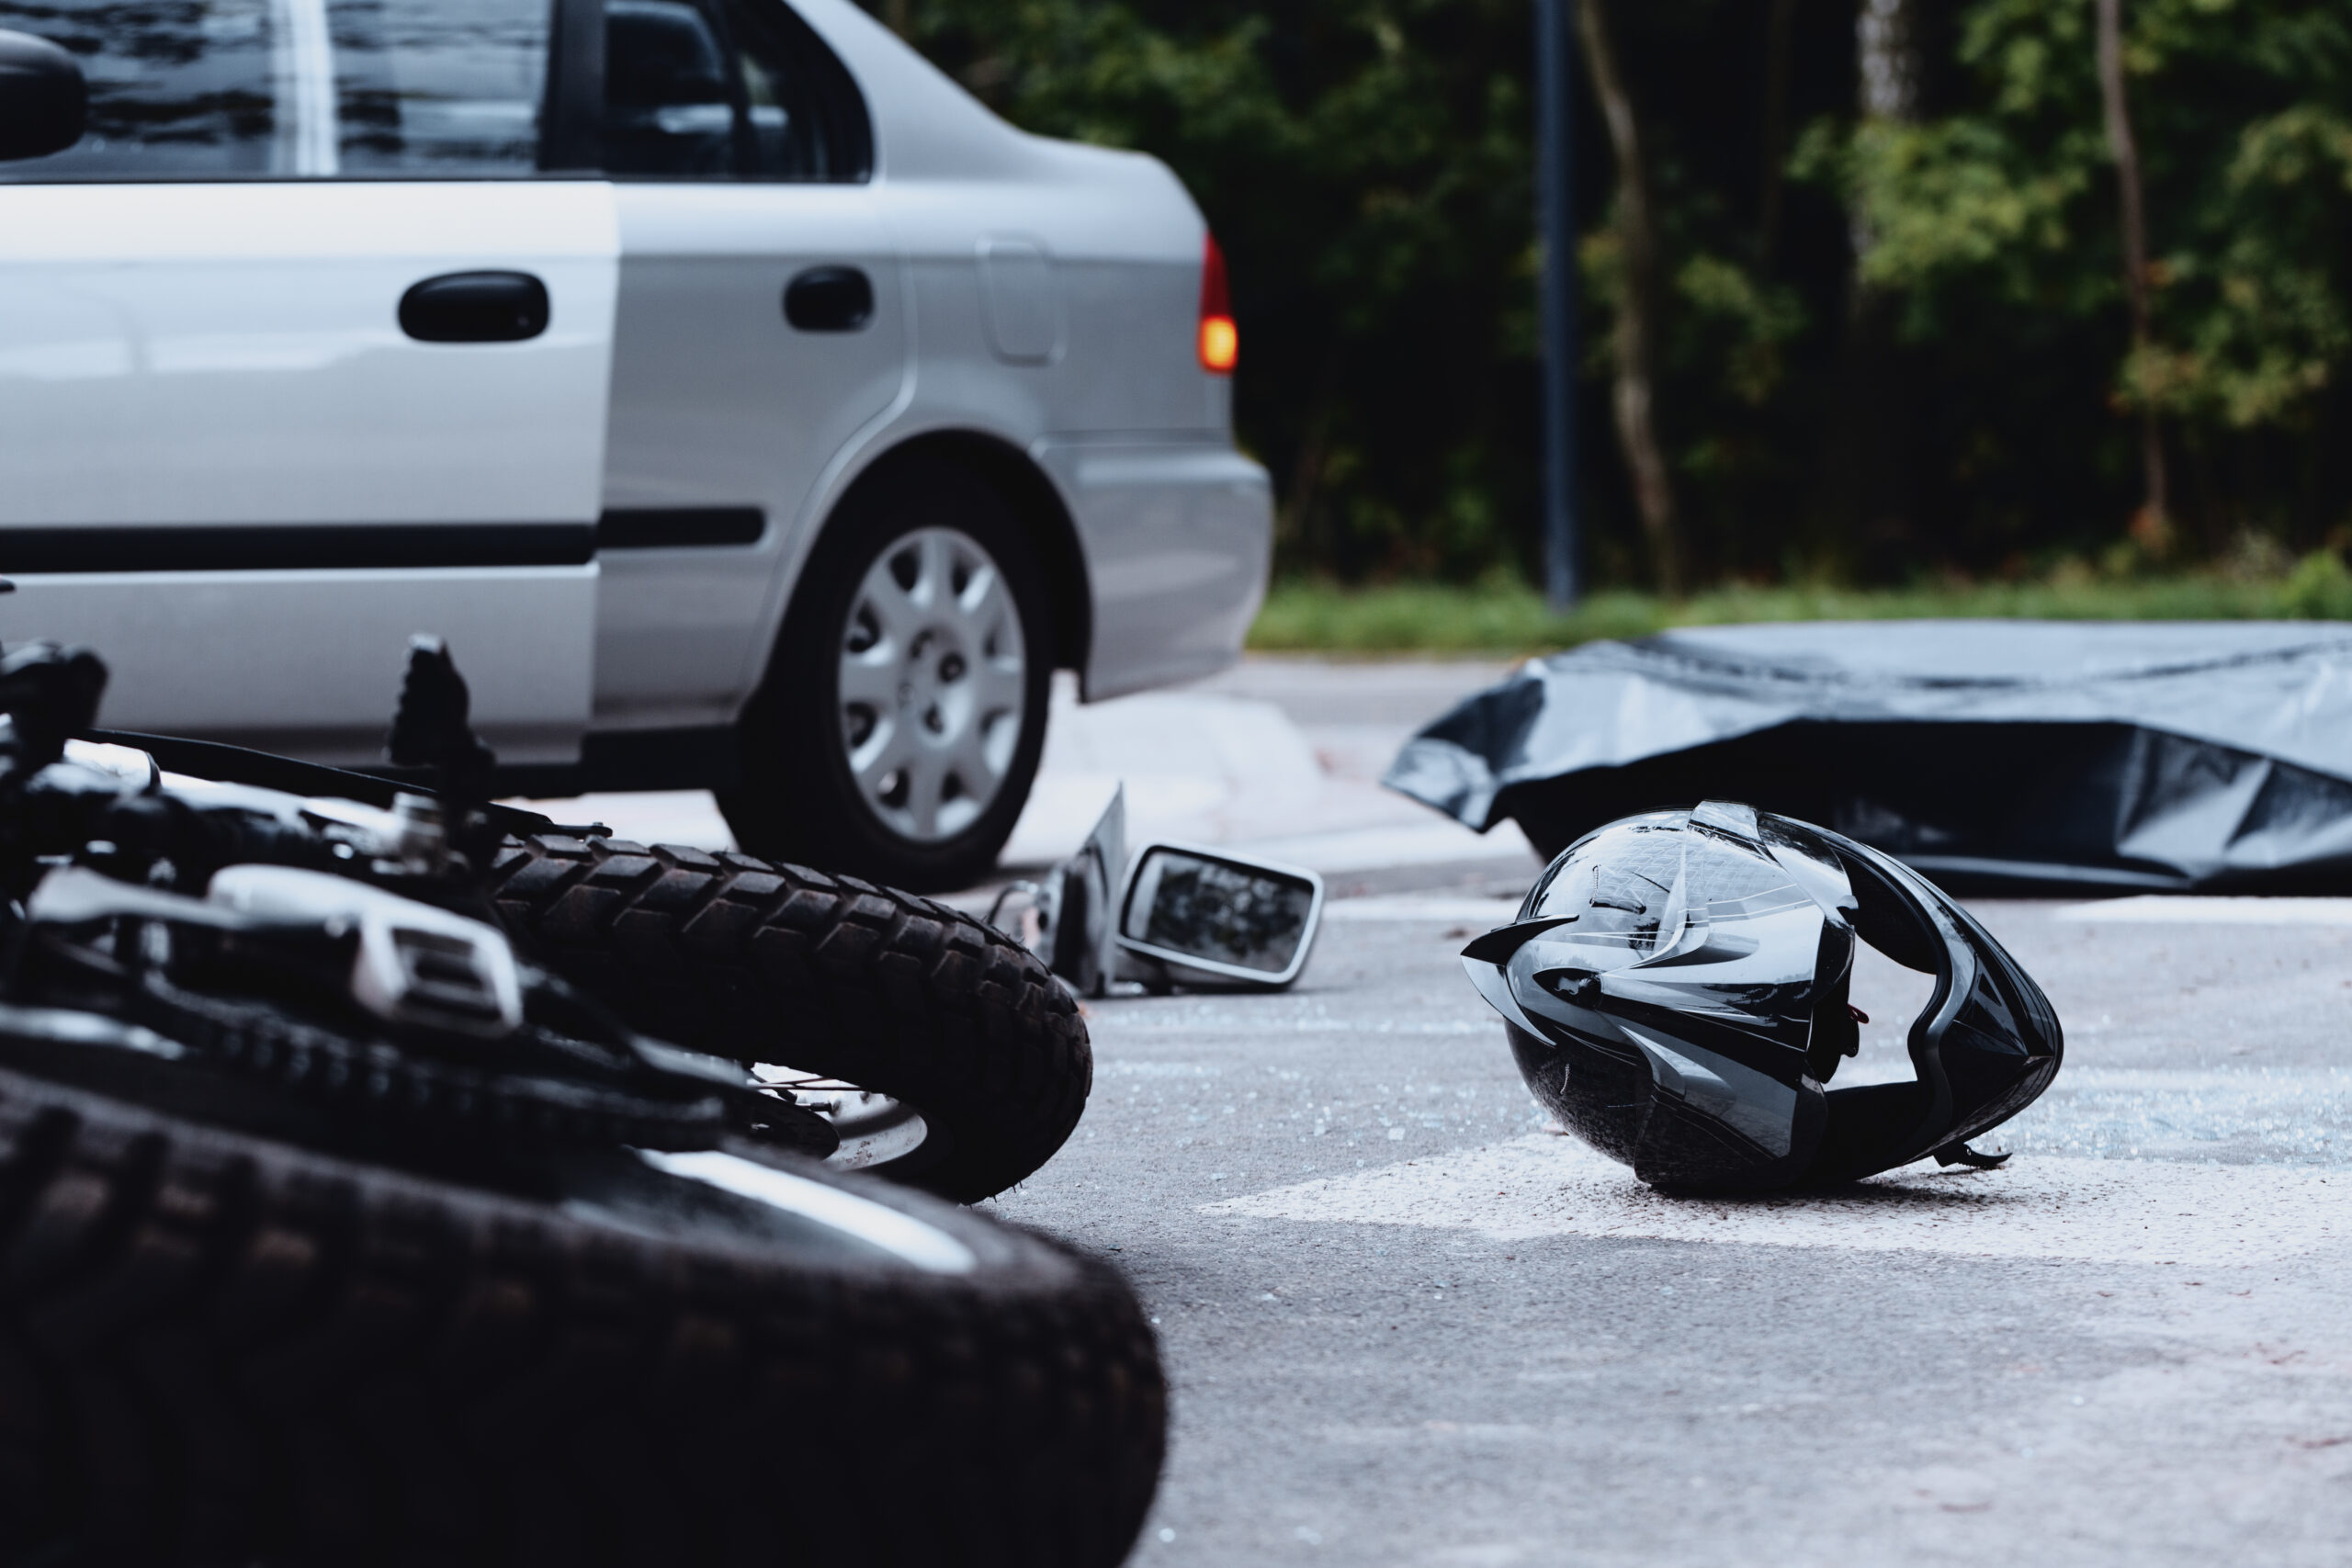 How Long does a Motorcycle Accident Lawsuit Take?